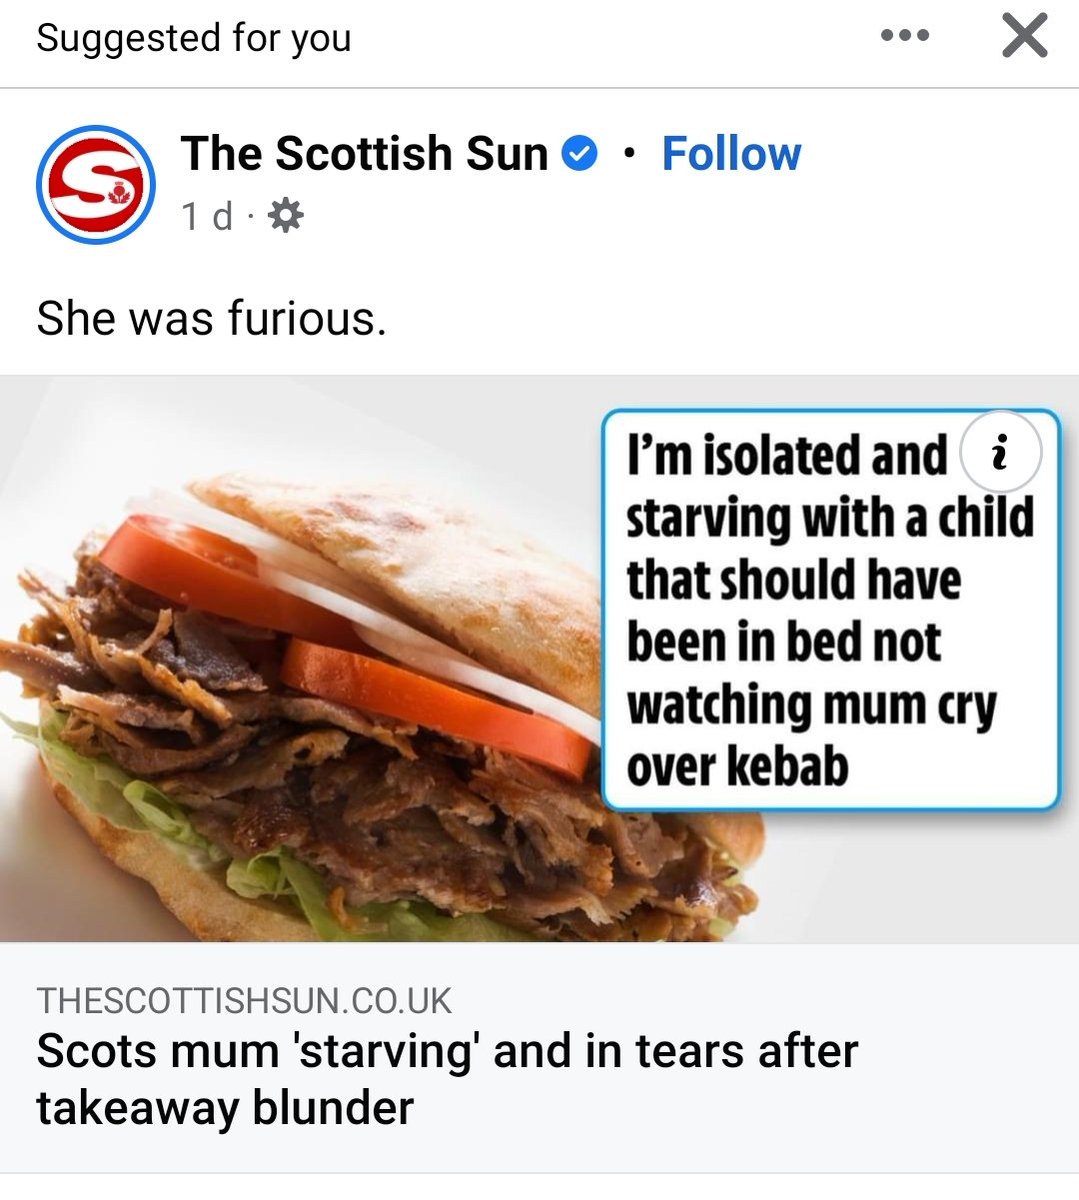 The Scottish Sun. Big News!!! Woman from Falkirk got the wrong sauce on her kebab 🥙 😂 😂 I'm ragin! Sending thoughts and prayers 🙏 What a shit rag. #dontbuythesun @ScottishSun